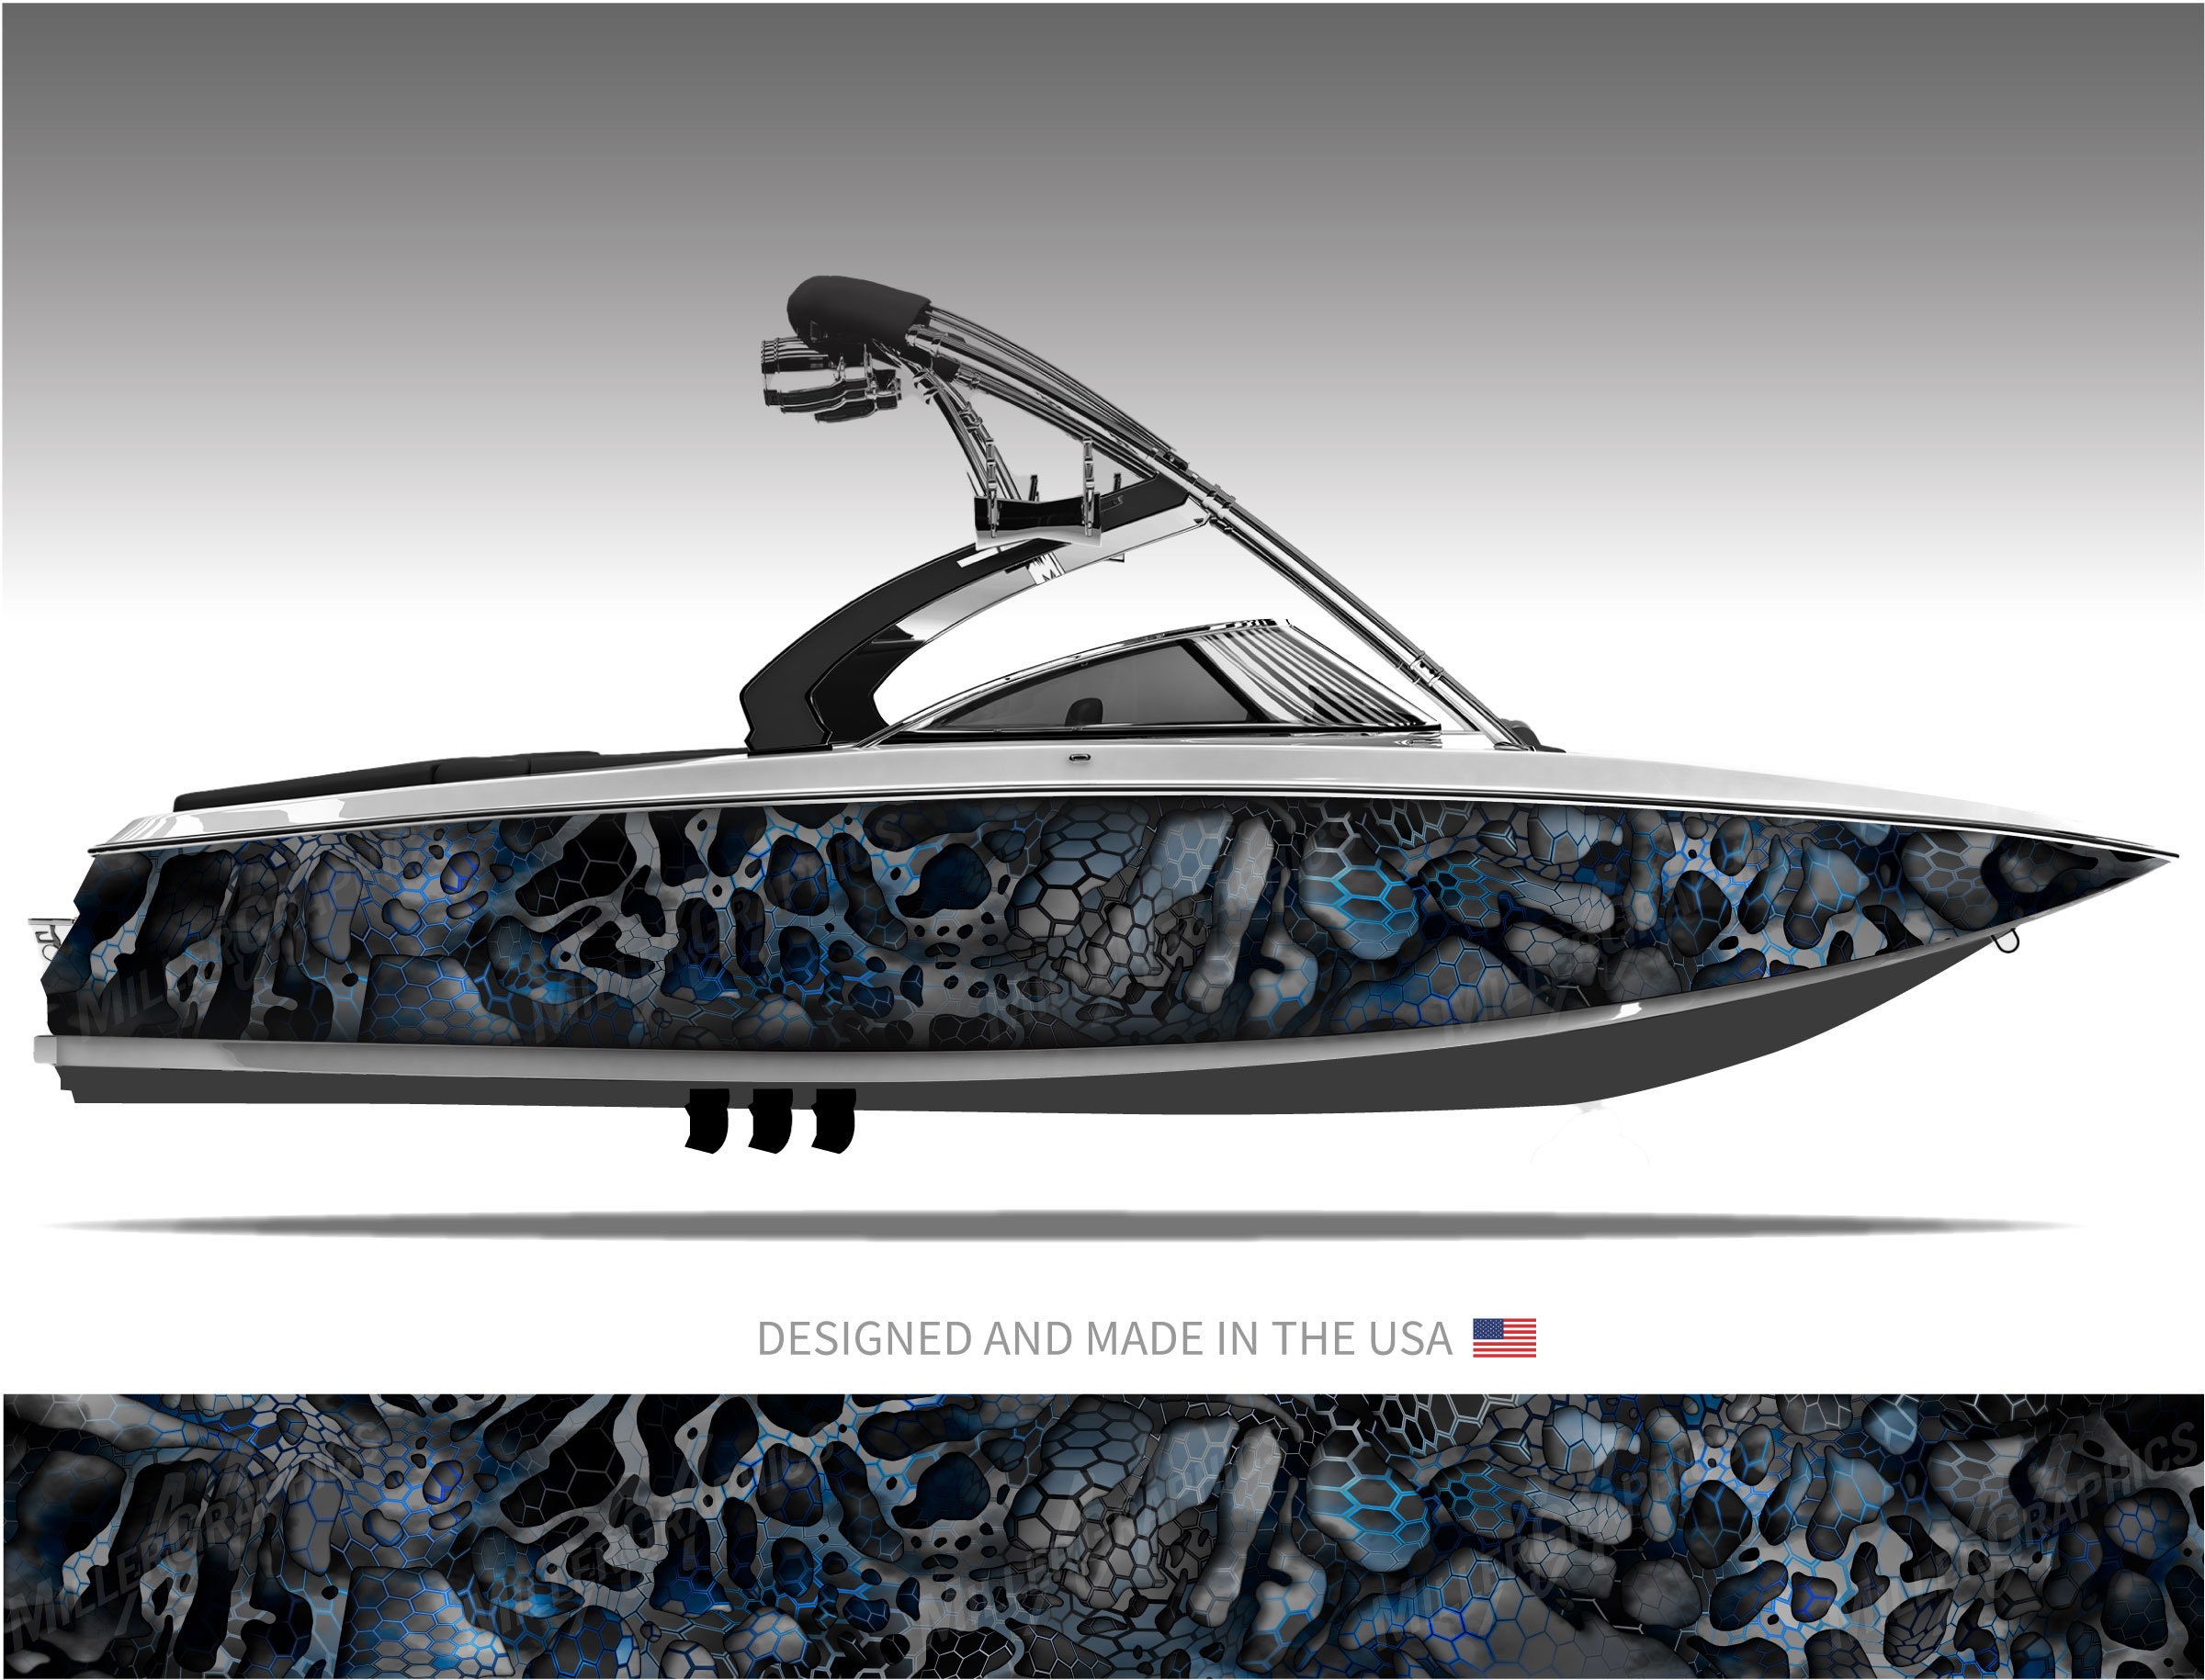 Sapphire Blue Graphic Vinyl Boat Wrap Decal Fishing Pontoon Sportsman  Console Bowriders Deck Boat Watercraft Etc.. Boat Wrap Decal 